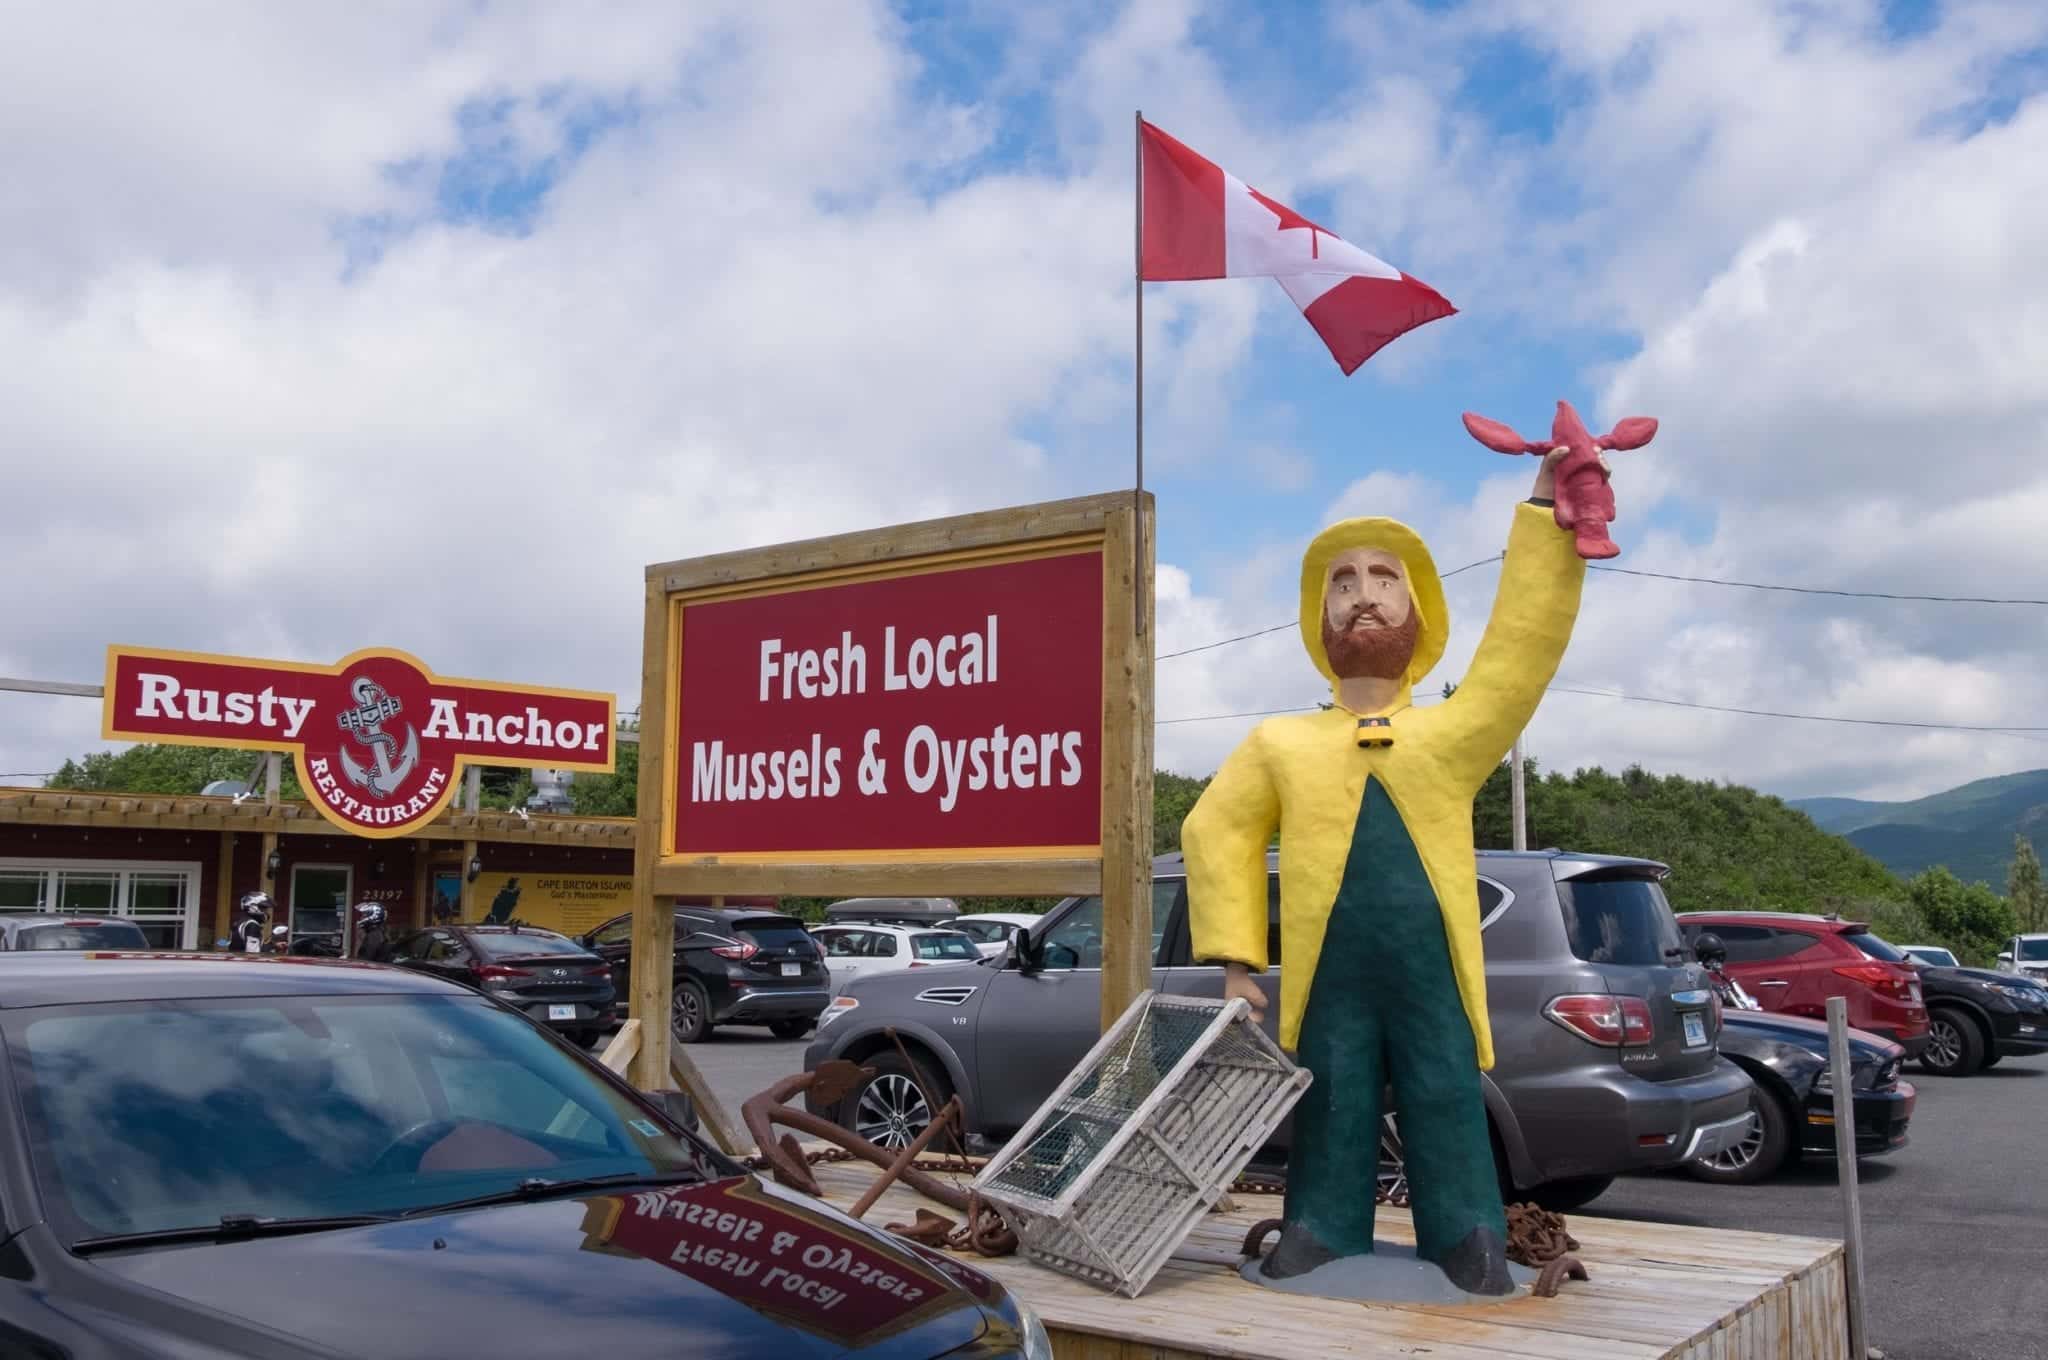 A wooden fisherman holds up lobster outside the Rusty Anchor restaurant in front of a sign that reads Fresh Local Mussels and Oysters.